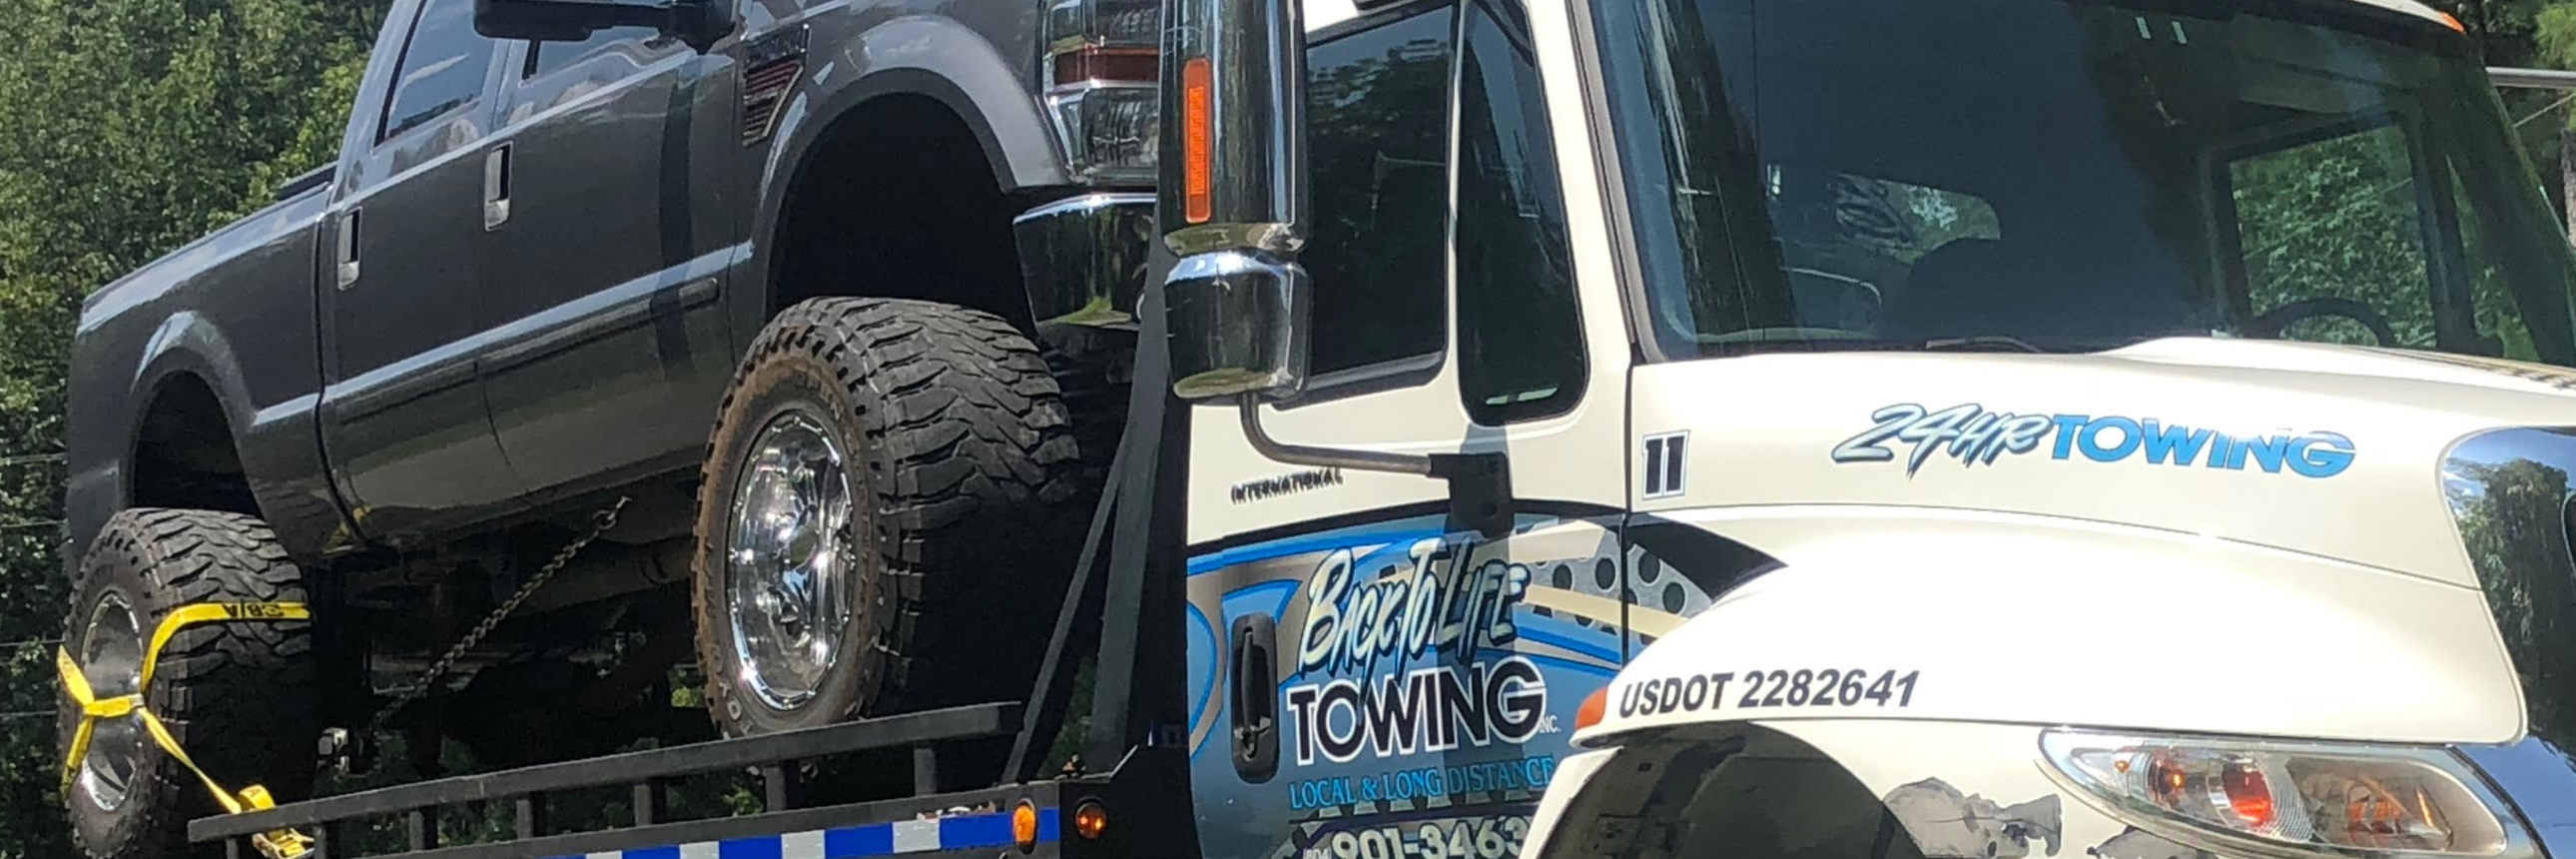 Back to life towing, inc Towing.com Profile Banner